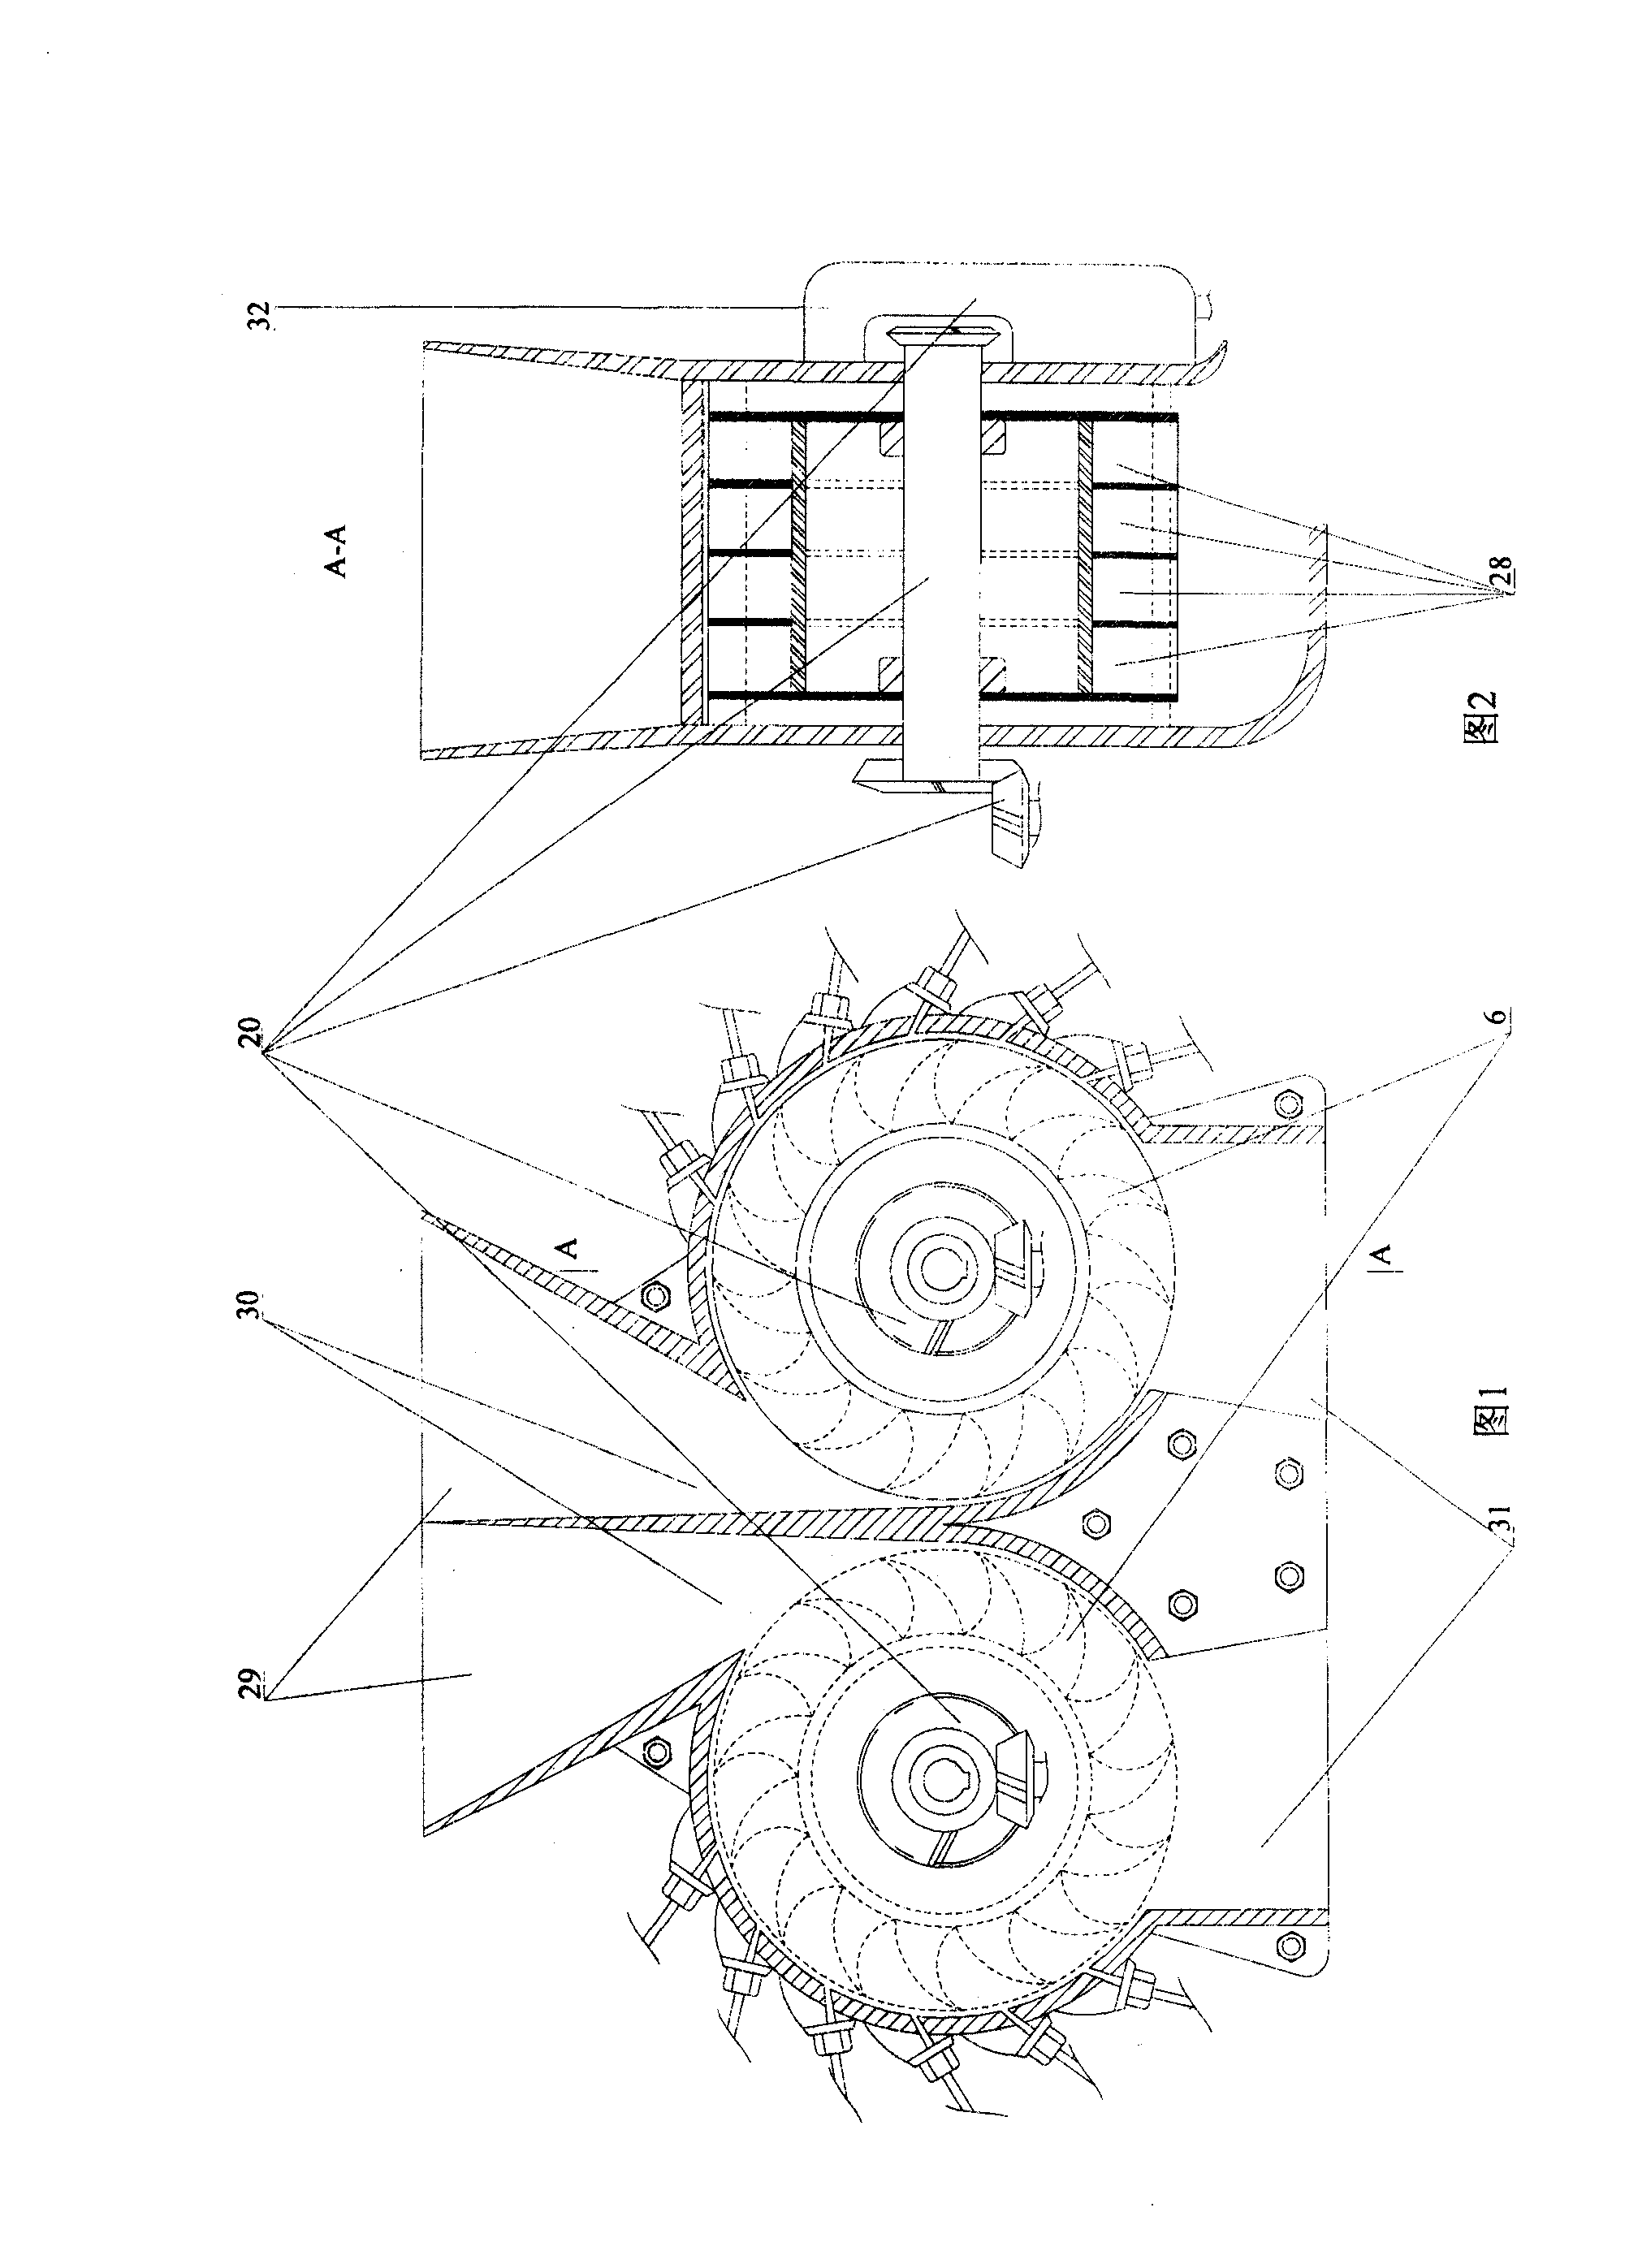 Wind-air engine, namely engine using wind and air pressure as energy to replace fuel